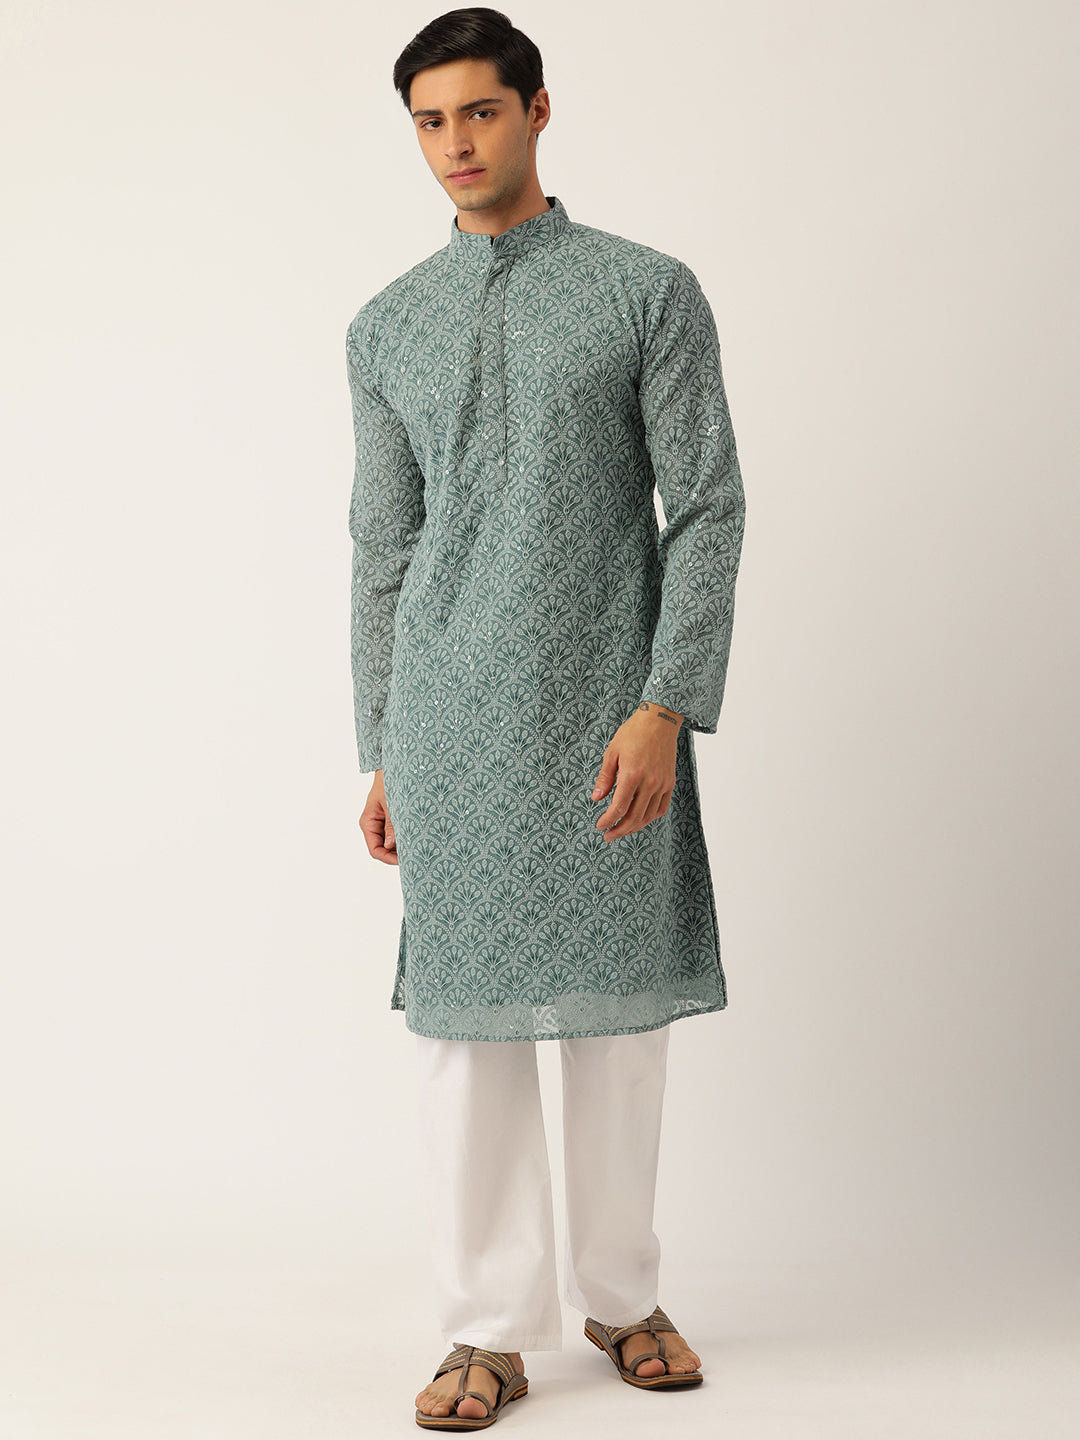 TURQUOISE BLUE GEORGETTE EMBROIDERED MEN\'S KURTA